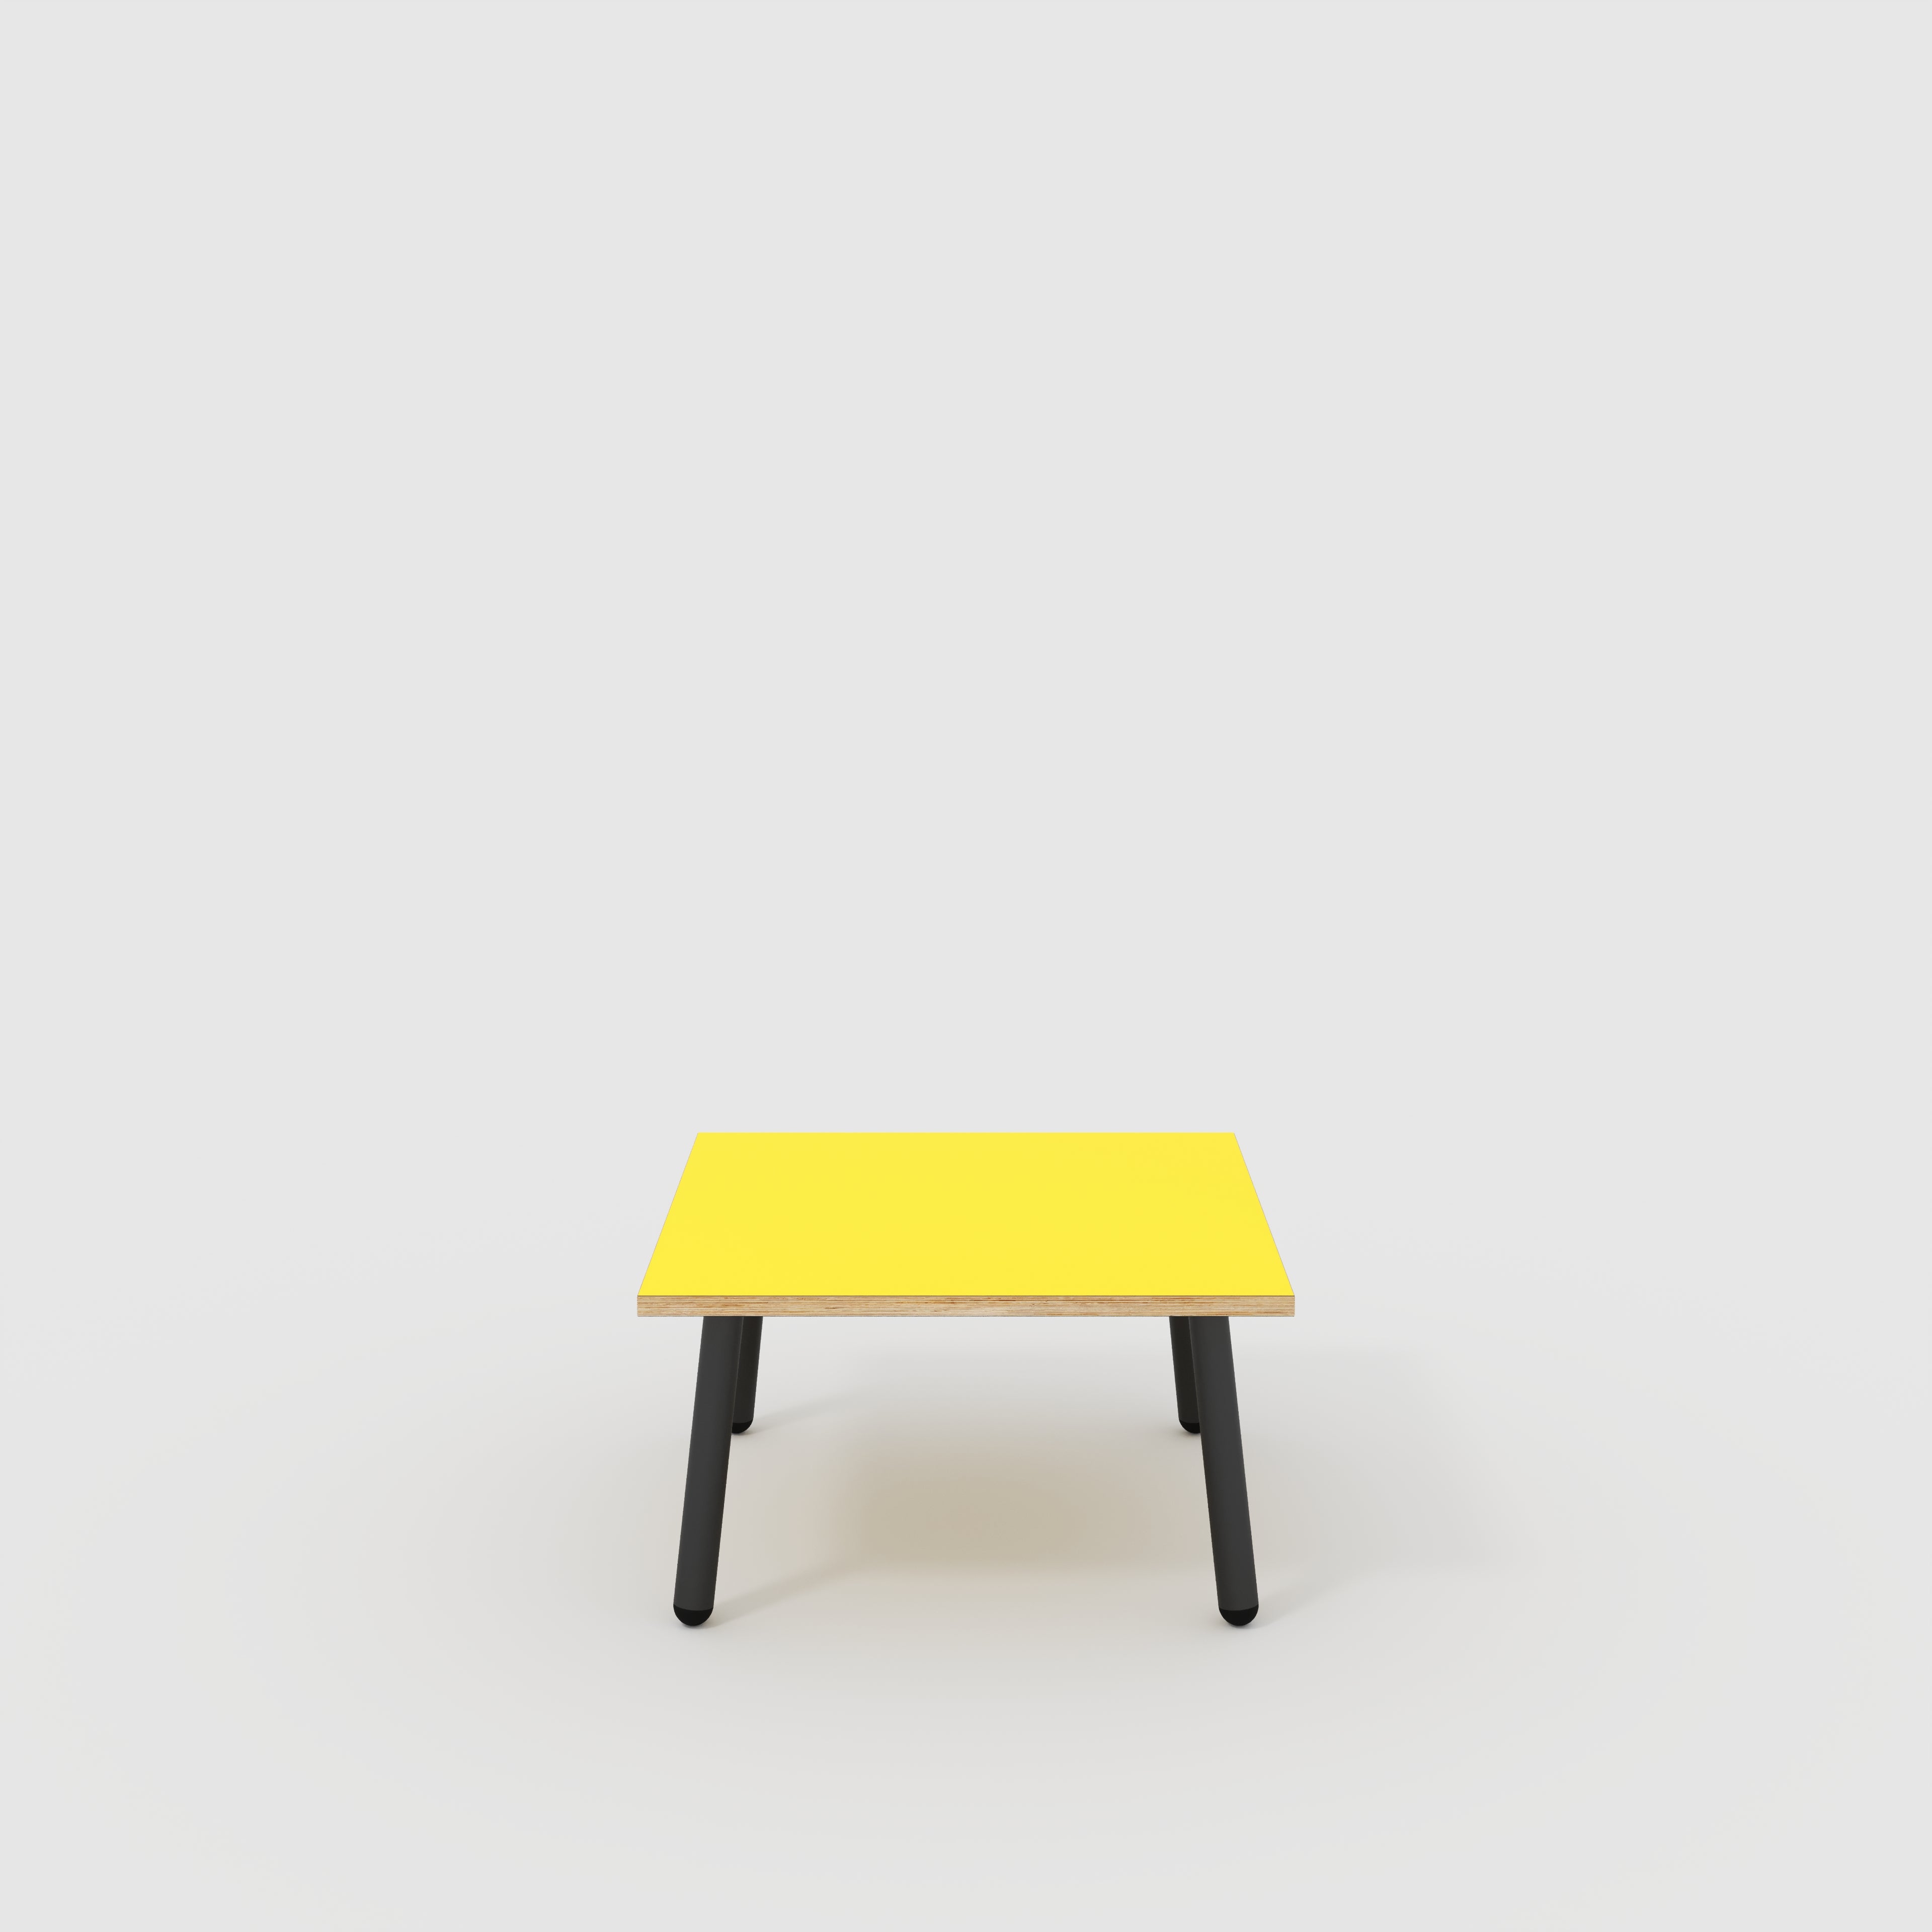 Coffee Table with Black Round Single Pin Legs - Formica Chrome Yellow - 800(w) x 800(d) x 425(h)